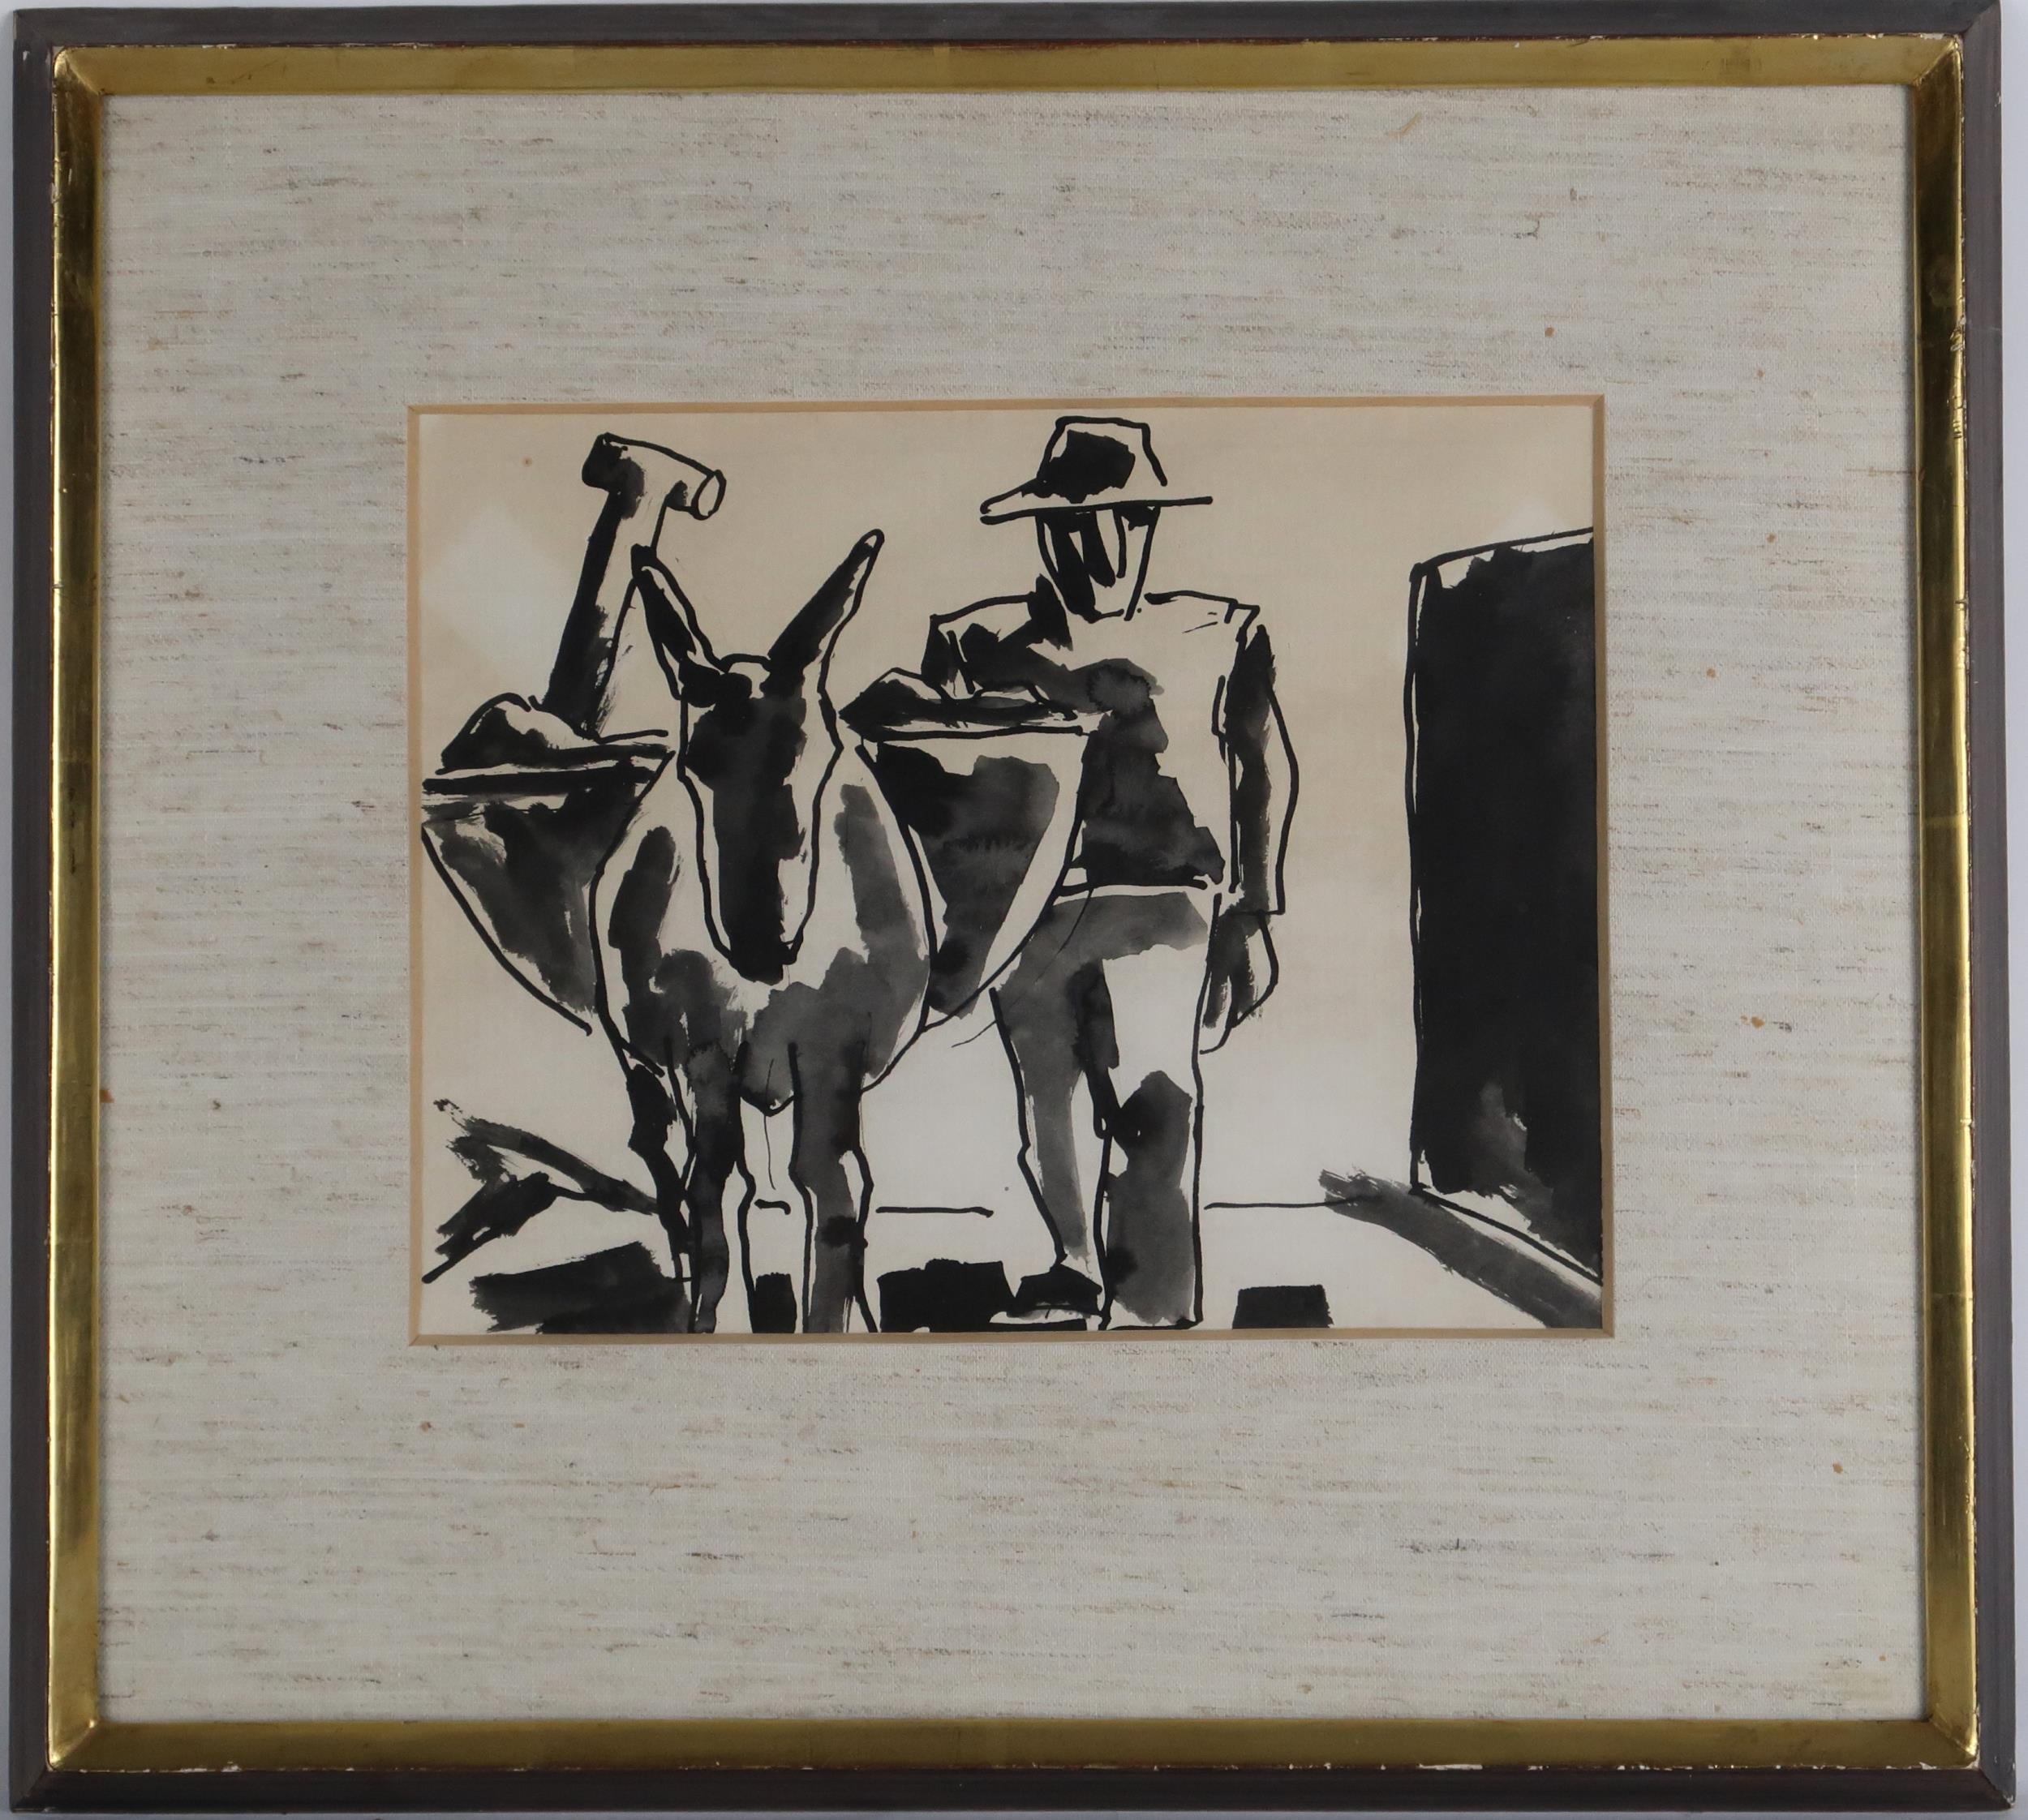 JOSEF HERMAN OBE RA (BRITISH 1911-2000) RURAL LABOURER WITH DONKEY Ink and wash, 19 x 24cm (7.5 x - Image 2 of 5